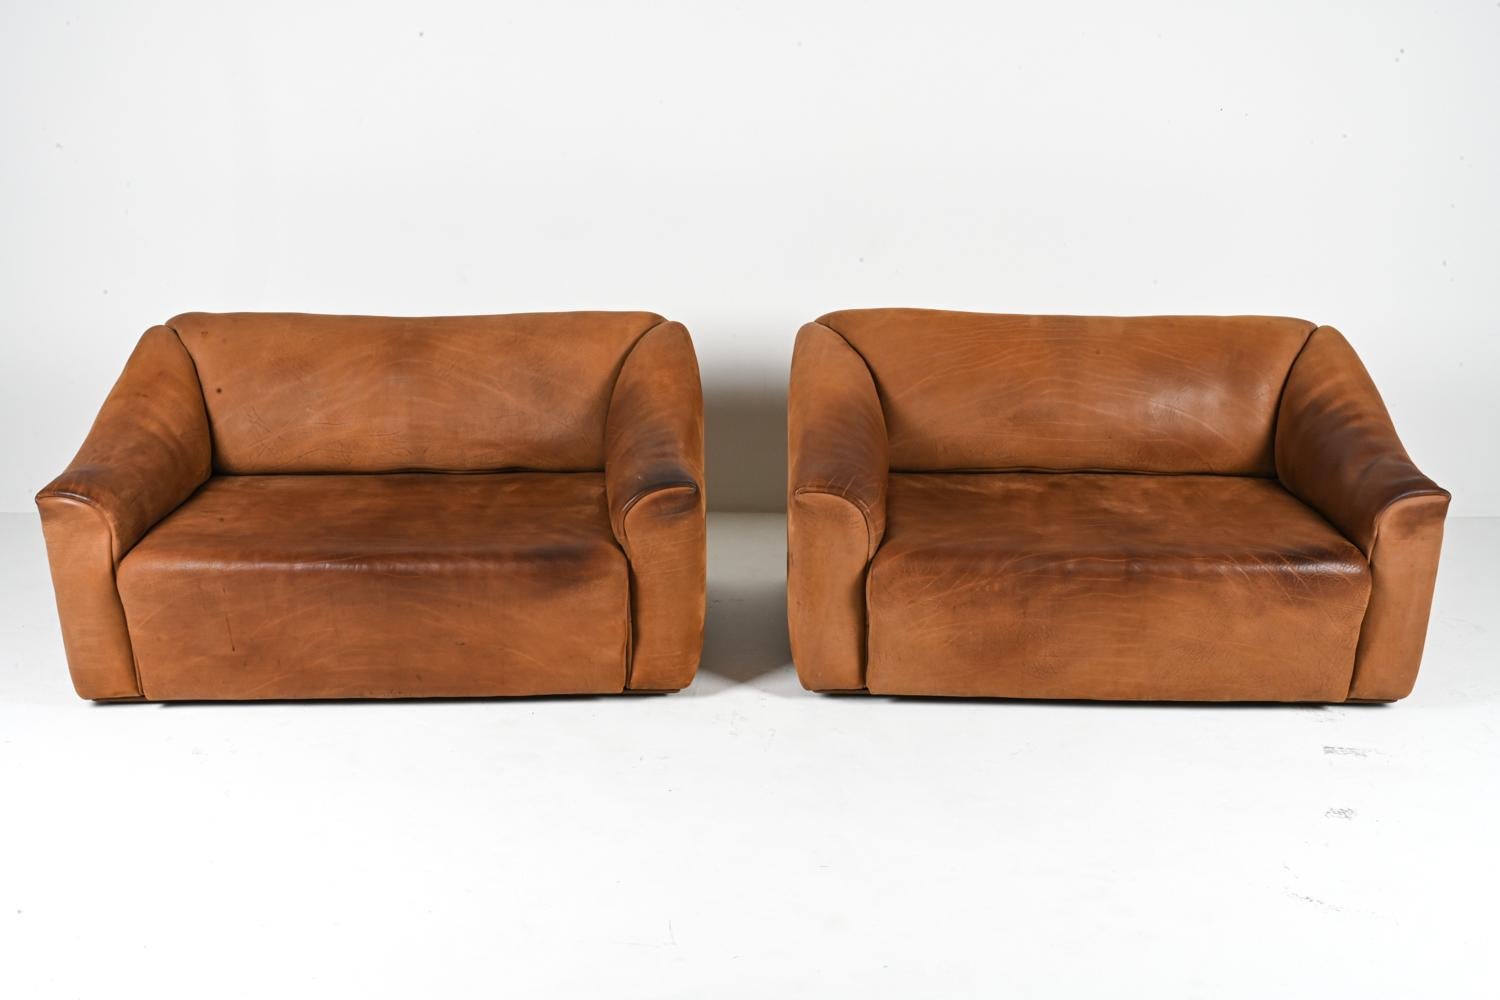 Pair of De Sede DS-47 Two-Seat Sofas in Nubuck Leather, c. 1970's In Good Condition For Sale In Norwalk, CT